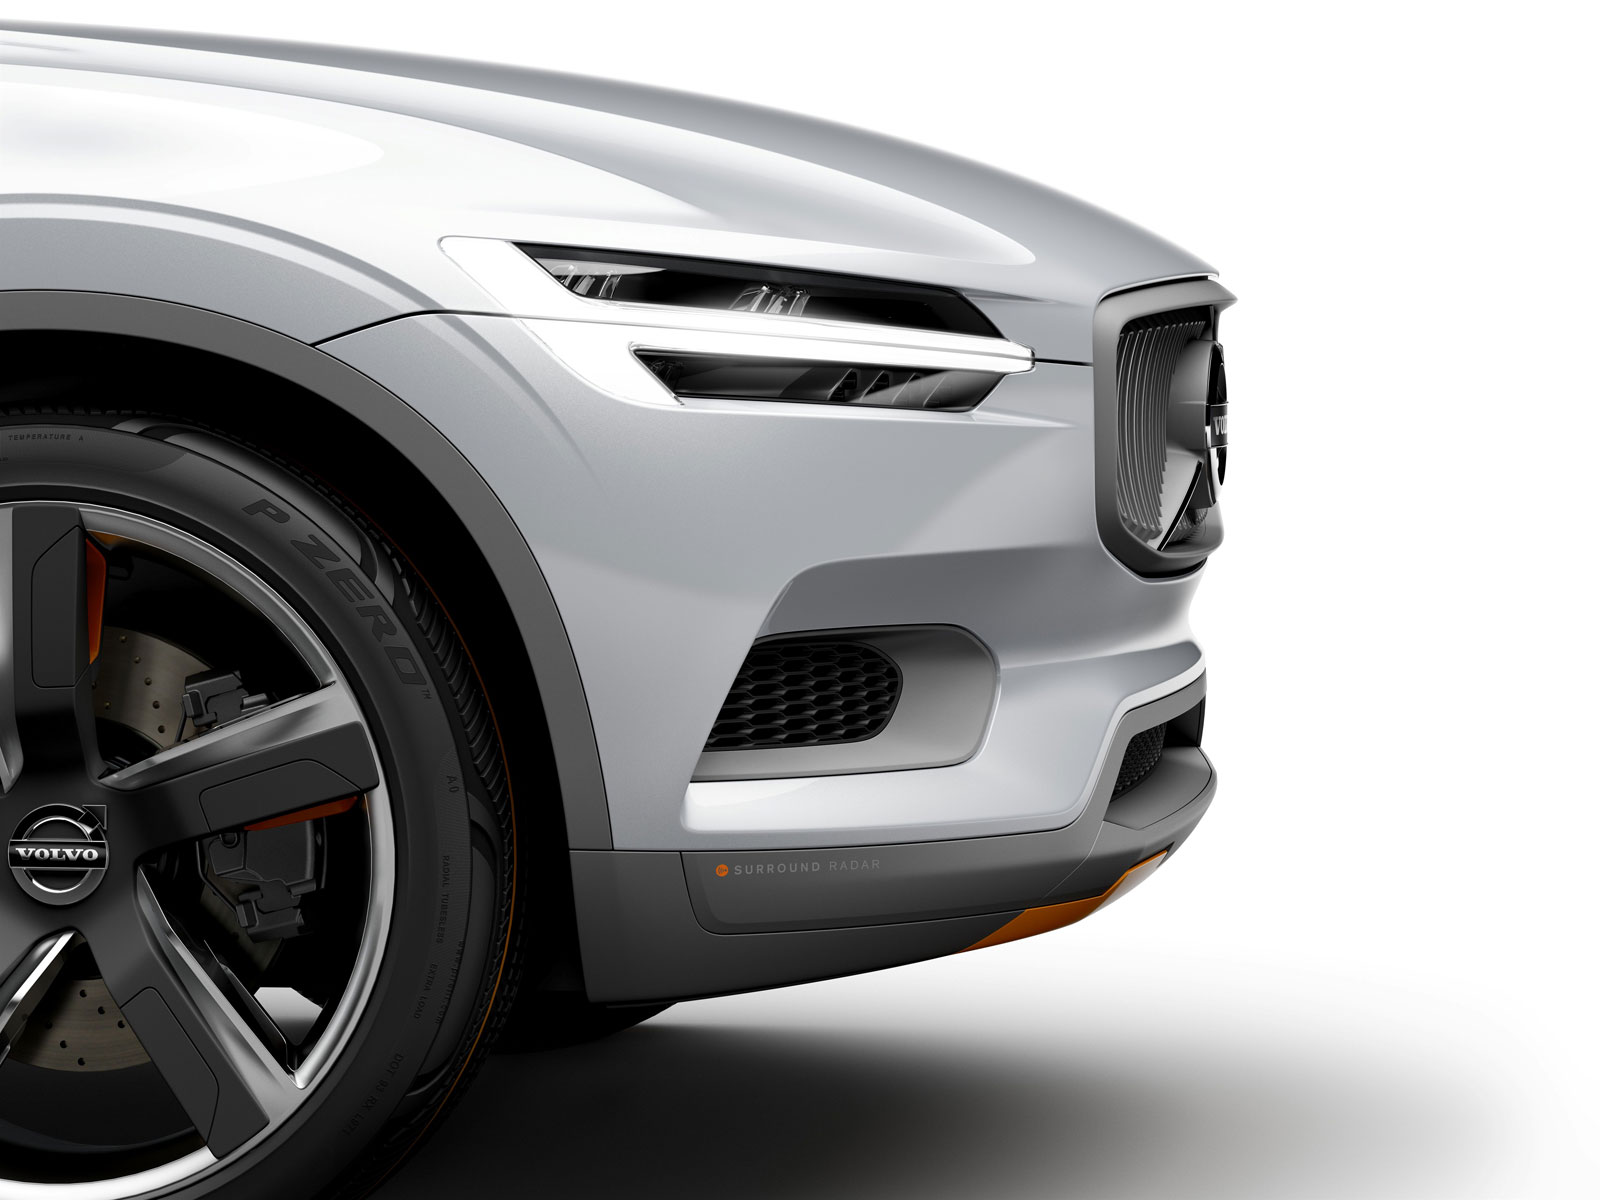 Volvo Concept XC Coupe, 2014 - Front end detail 